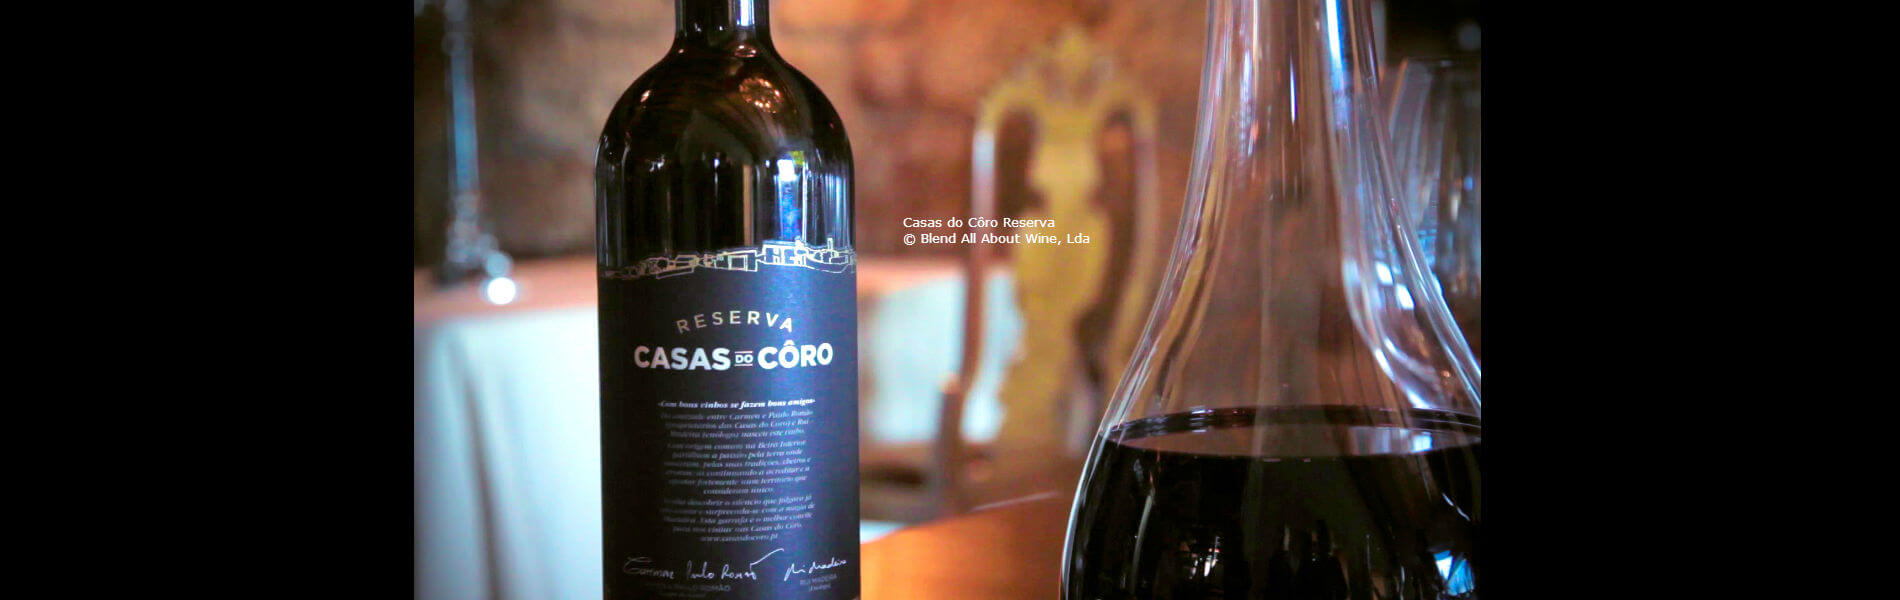 Blend-All-About-Wine-Casas do Coro-Slider